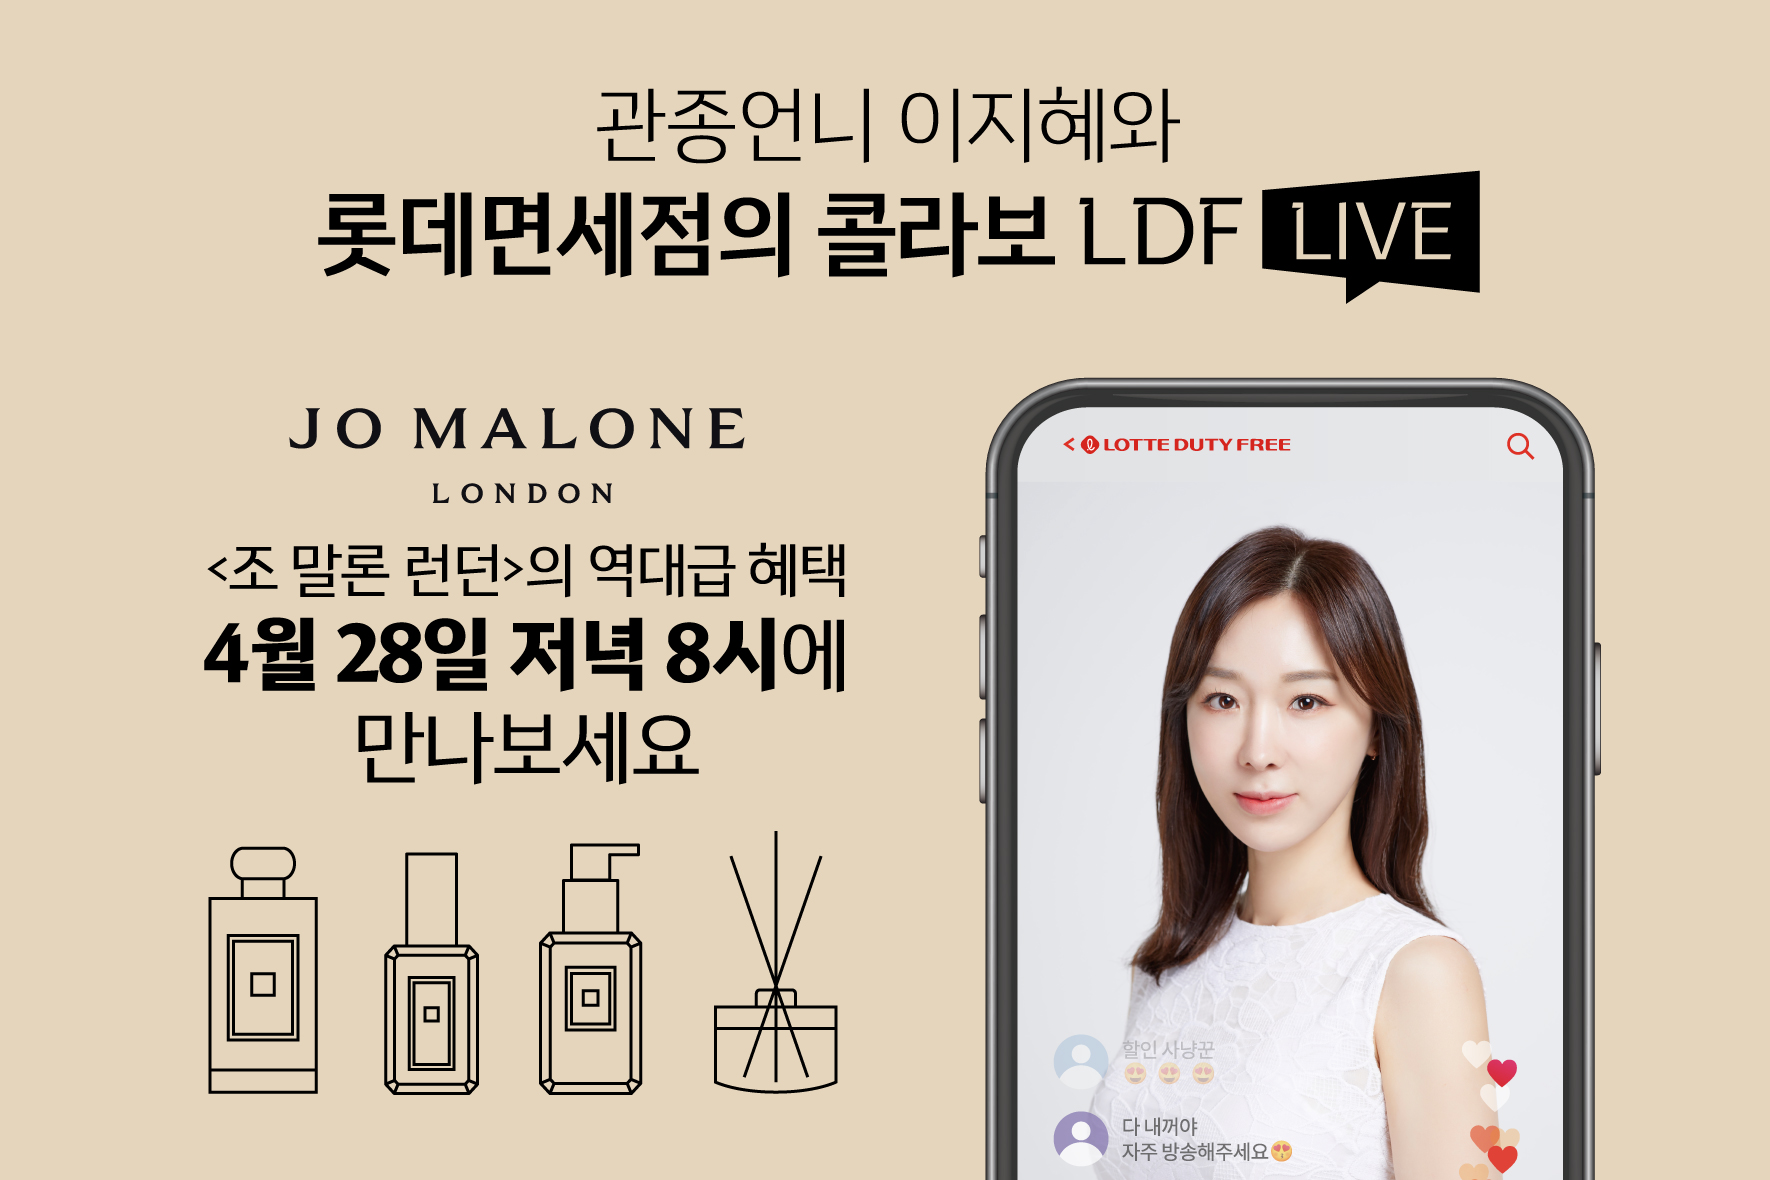 Lotte Duty Free to host live ecommerce show featuring Jo Malone and Korean star Lee Ji-hye